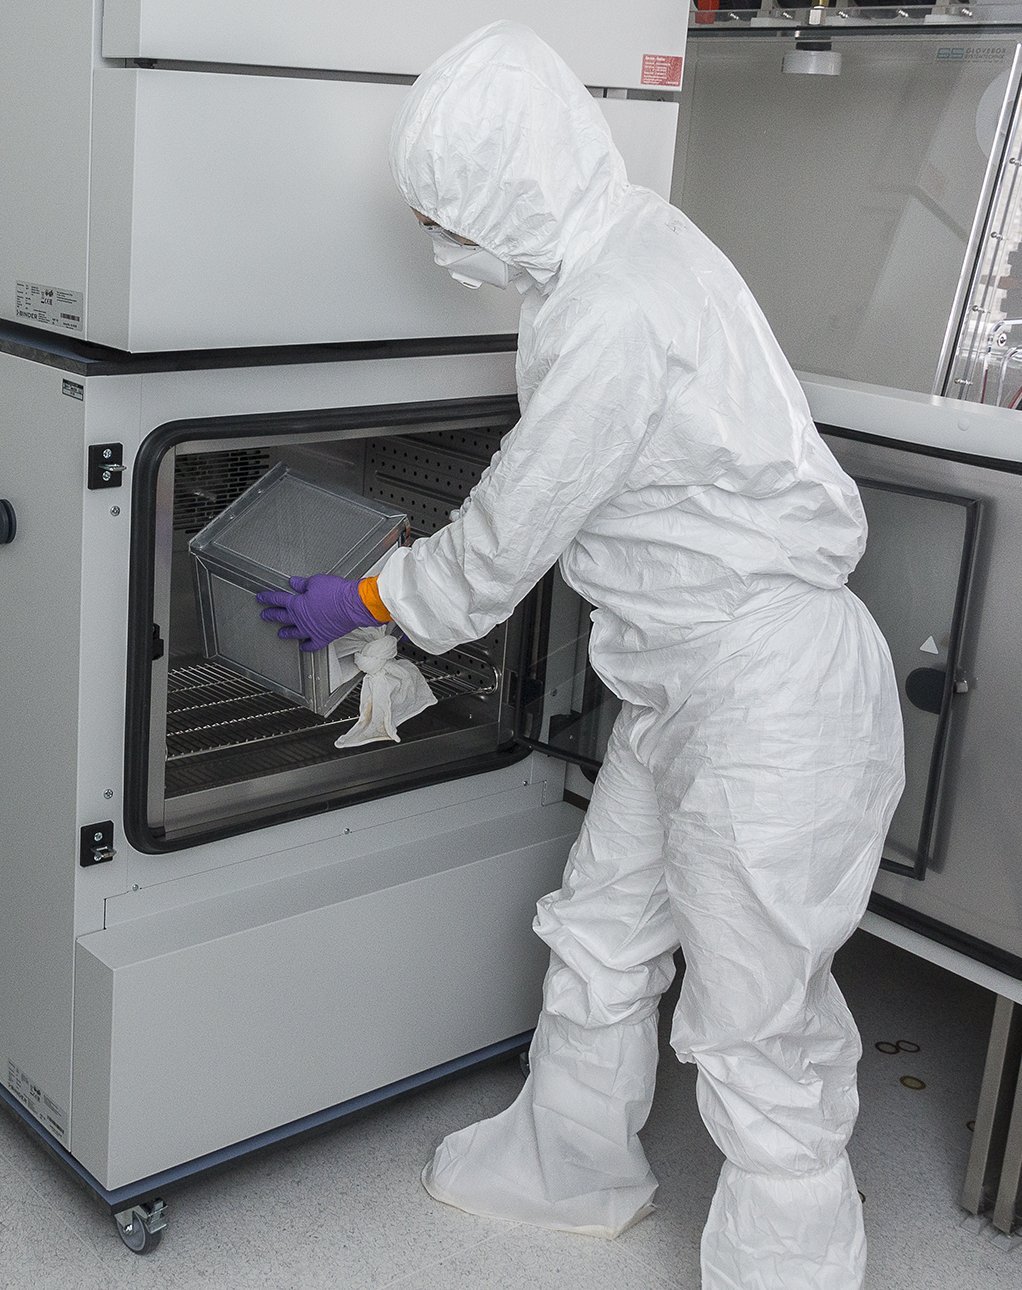 A researcher in a full protective suit is seen taking something out of the climate cabinet in a laboratory